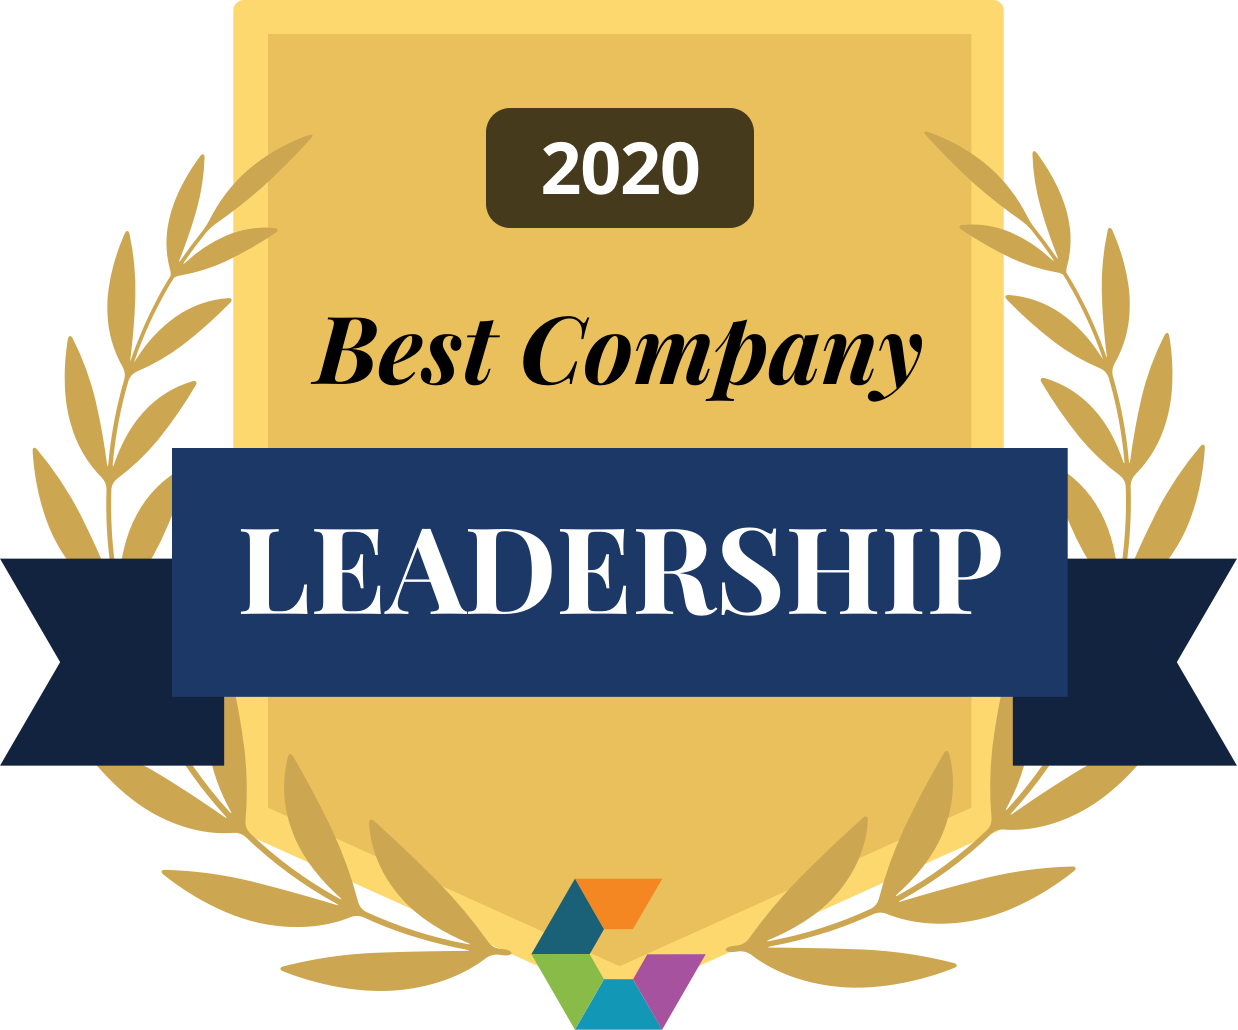 2020 award for best company for leadership